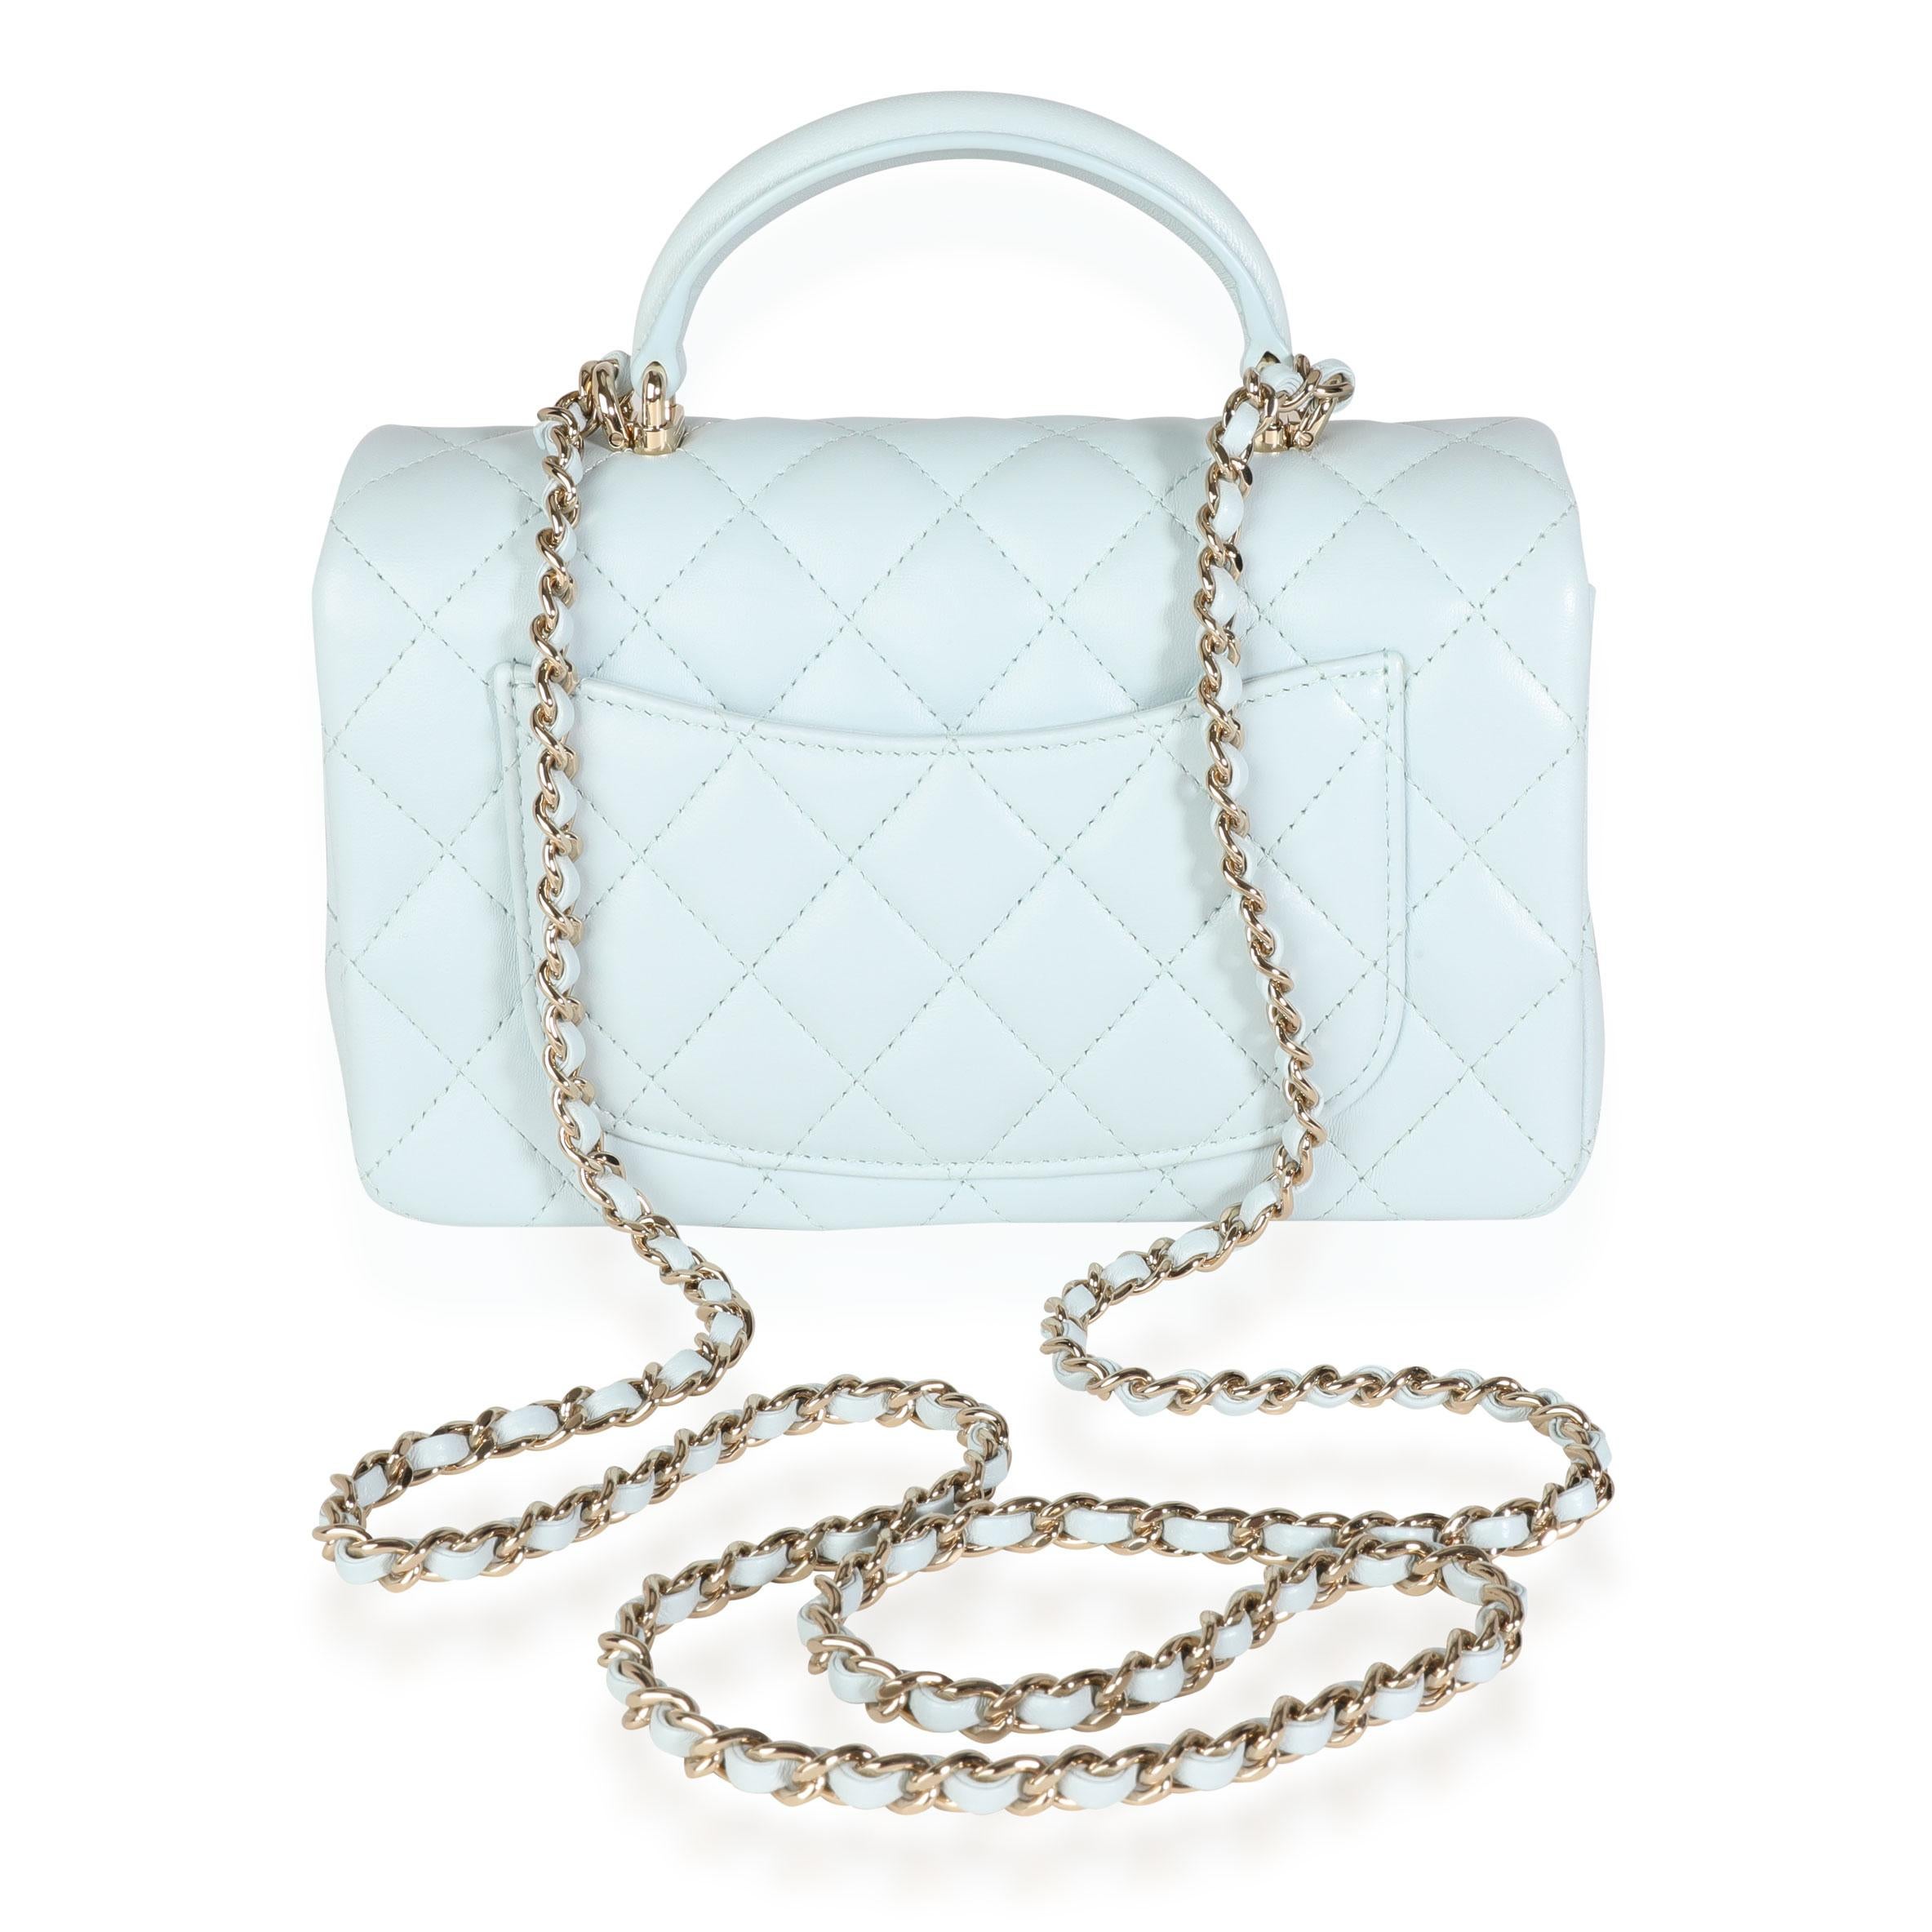 Listing Title: Chanel Light Blue Quilted Lambskin Rectangular Mini Top Handle Flap Bag
SKU: 115378
Condition: Pre-owned (3000)
Handbag Condition: Mint
Condition Comments: Mint Condition. Plastic on hardware. No visible signs of wear. Final